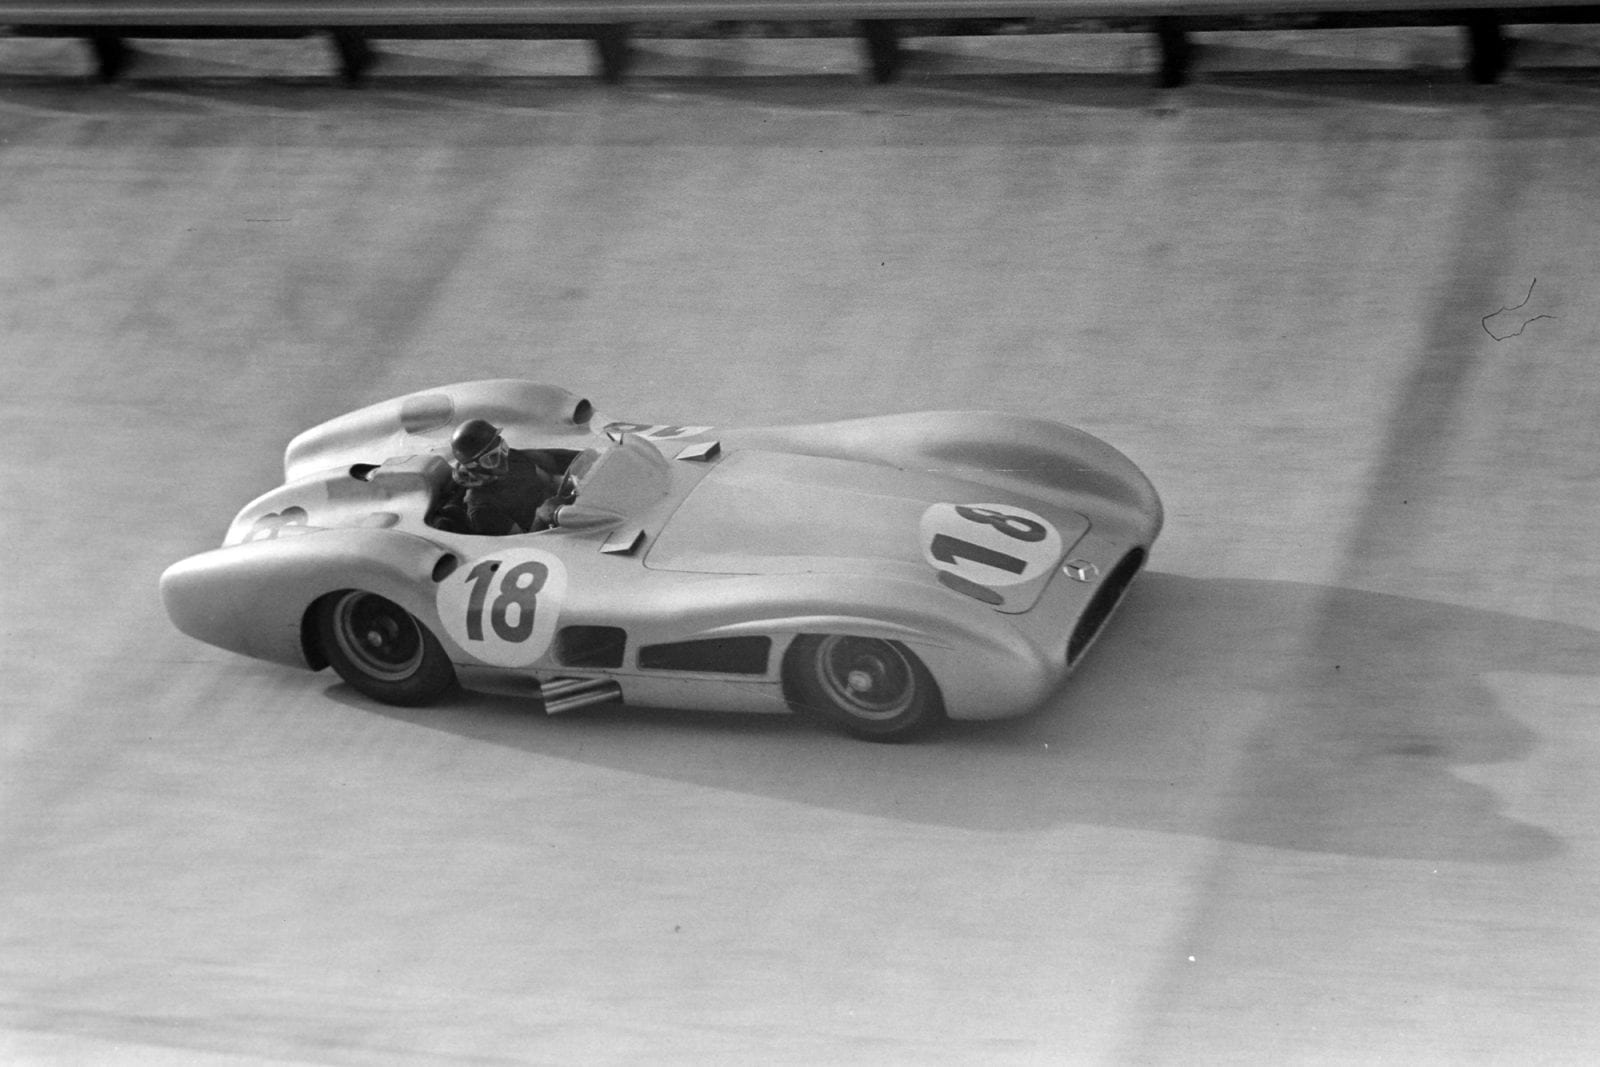 Juan Manuel Fangio takes on the Monza banking in his streamlined Mercedes W196 at the 1955 Italian Grand Prix